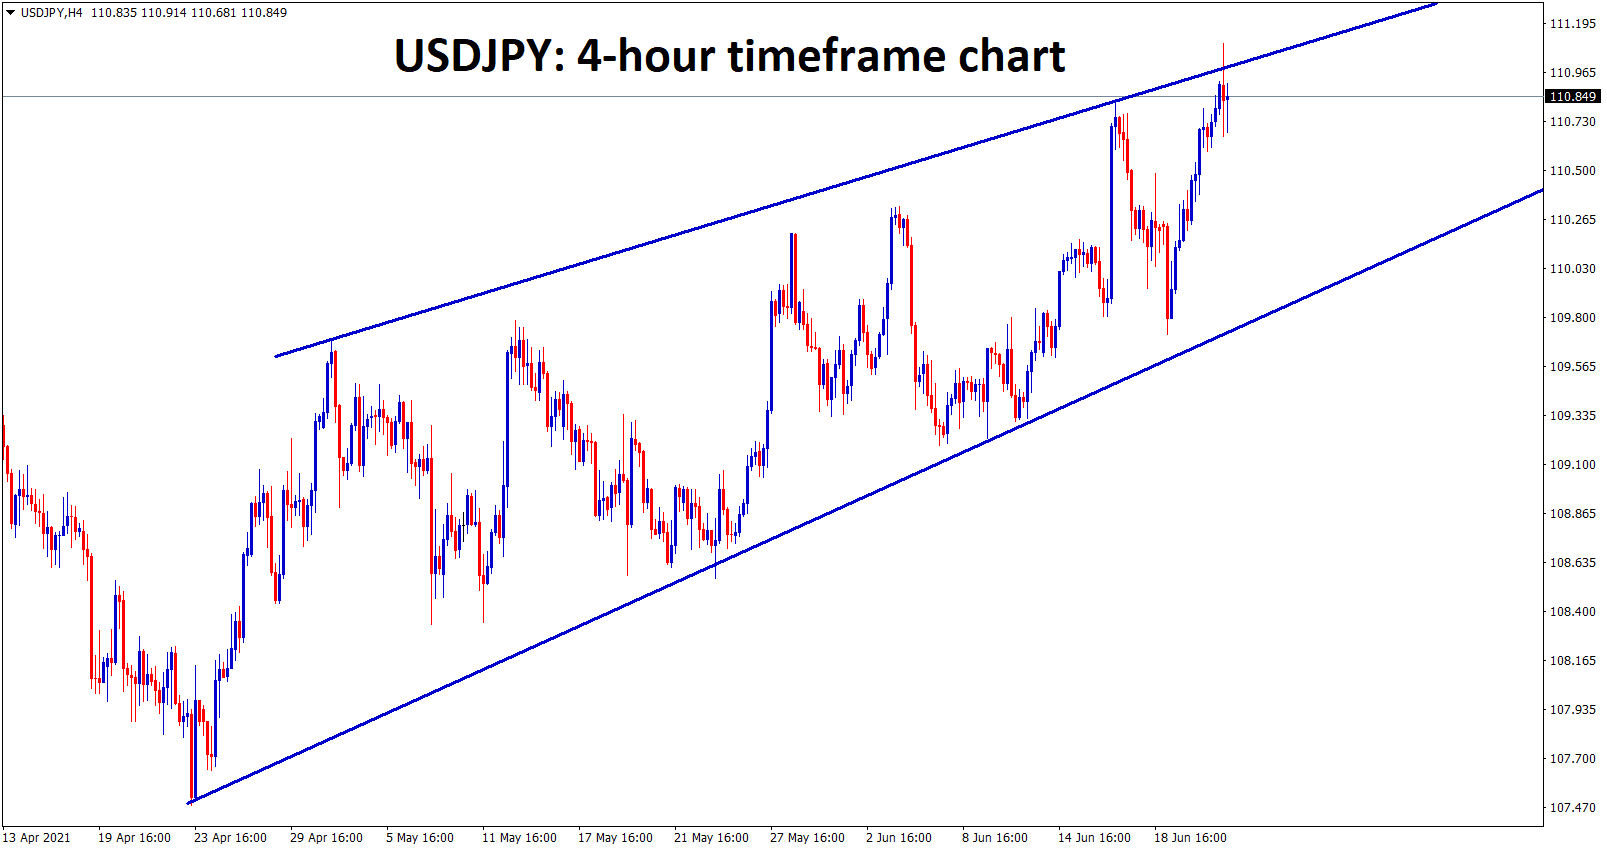 USDJPY is moving in an uptrend forming a wedge pattern